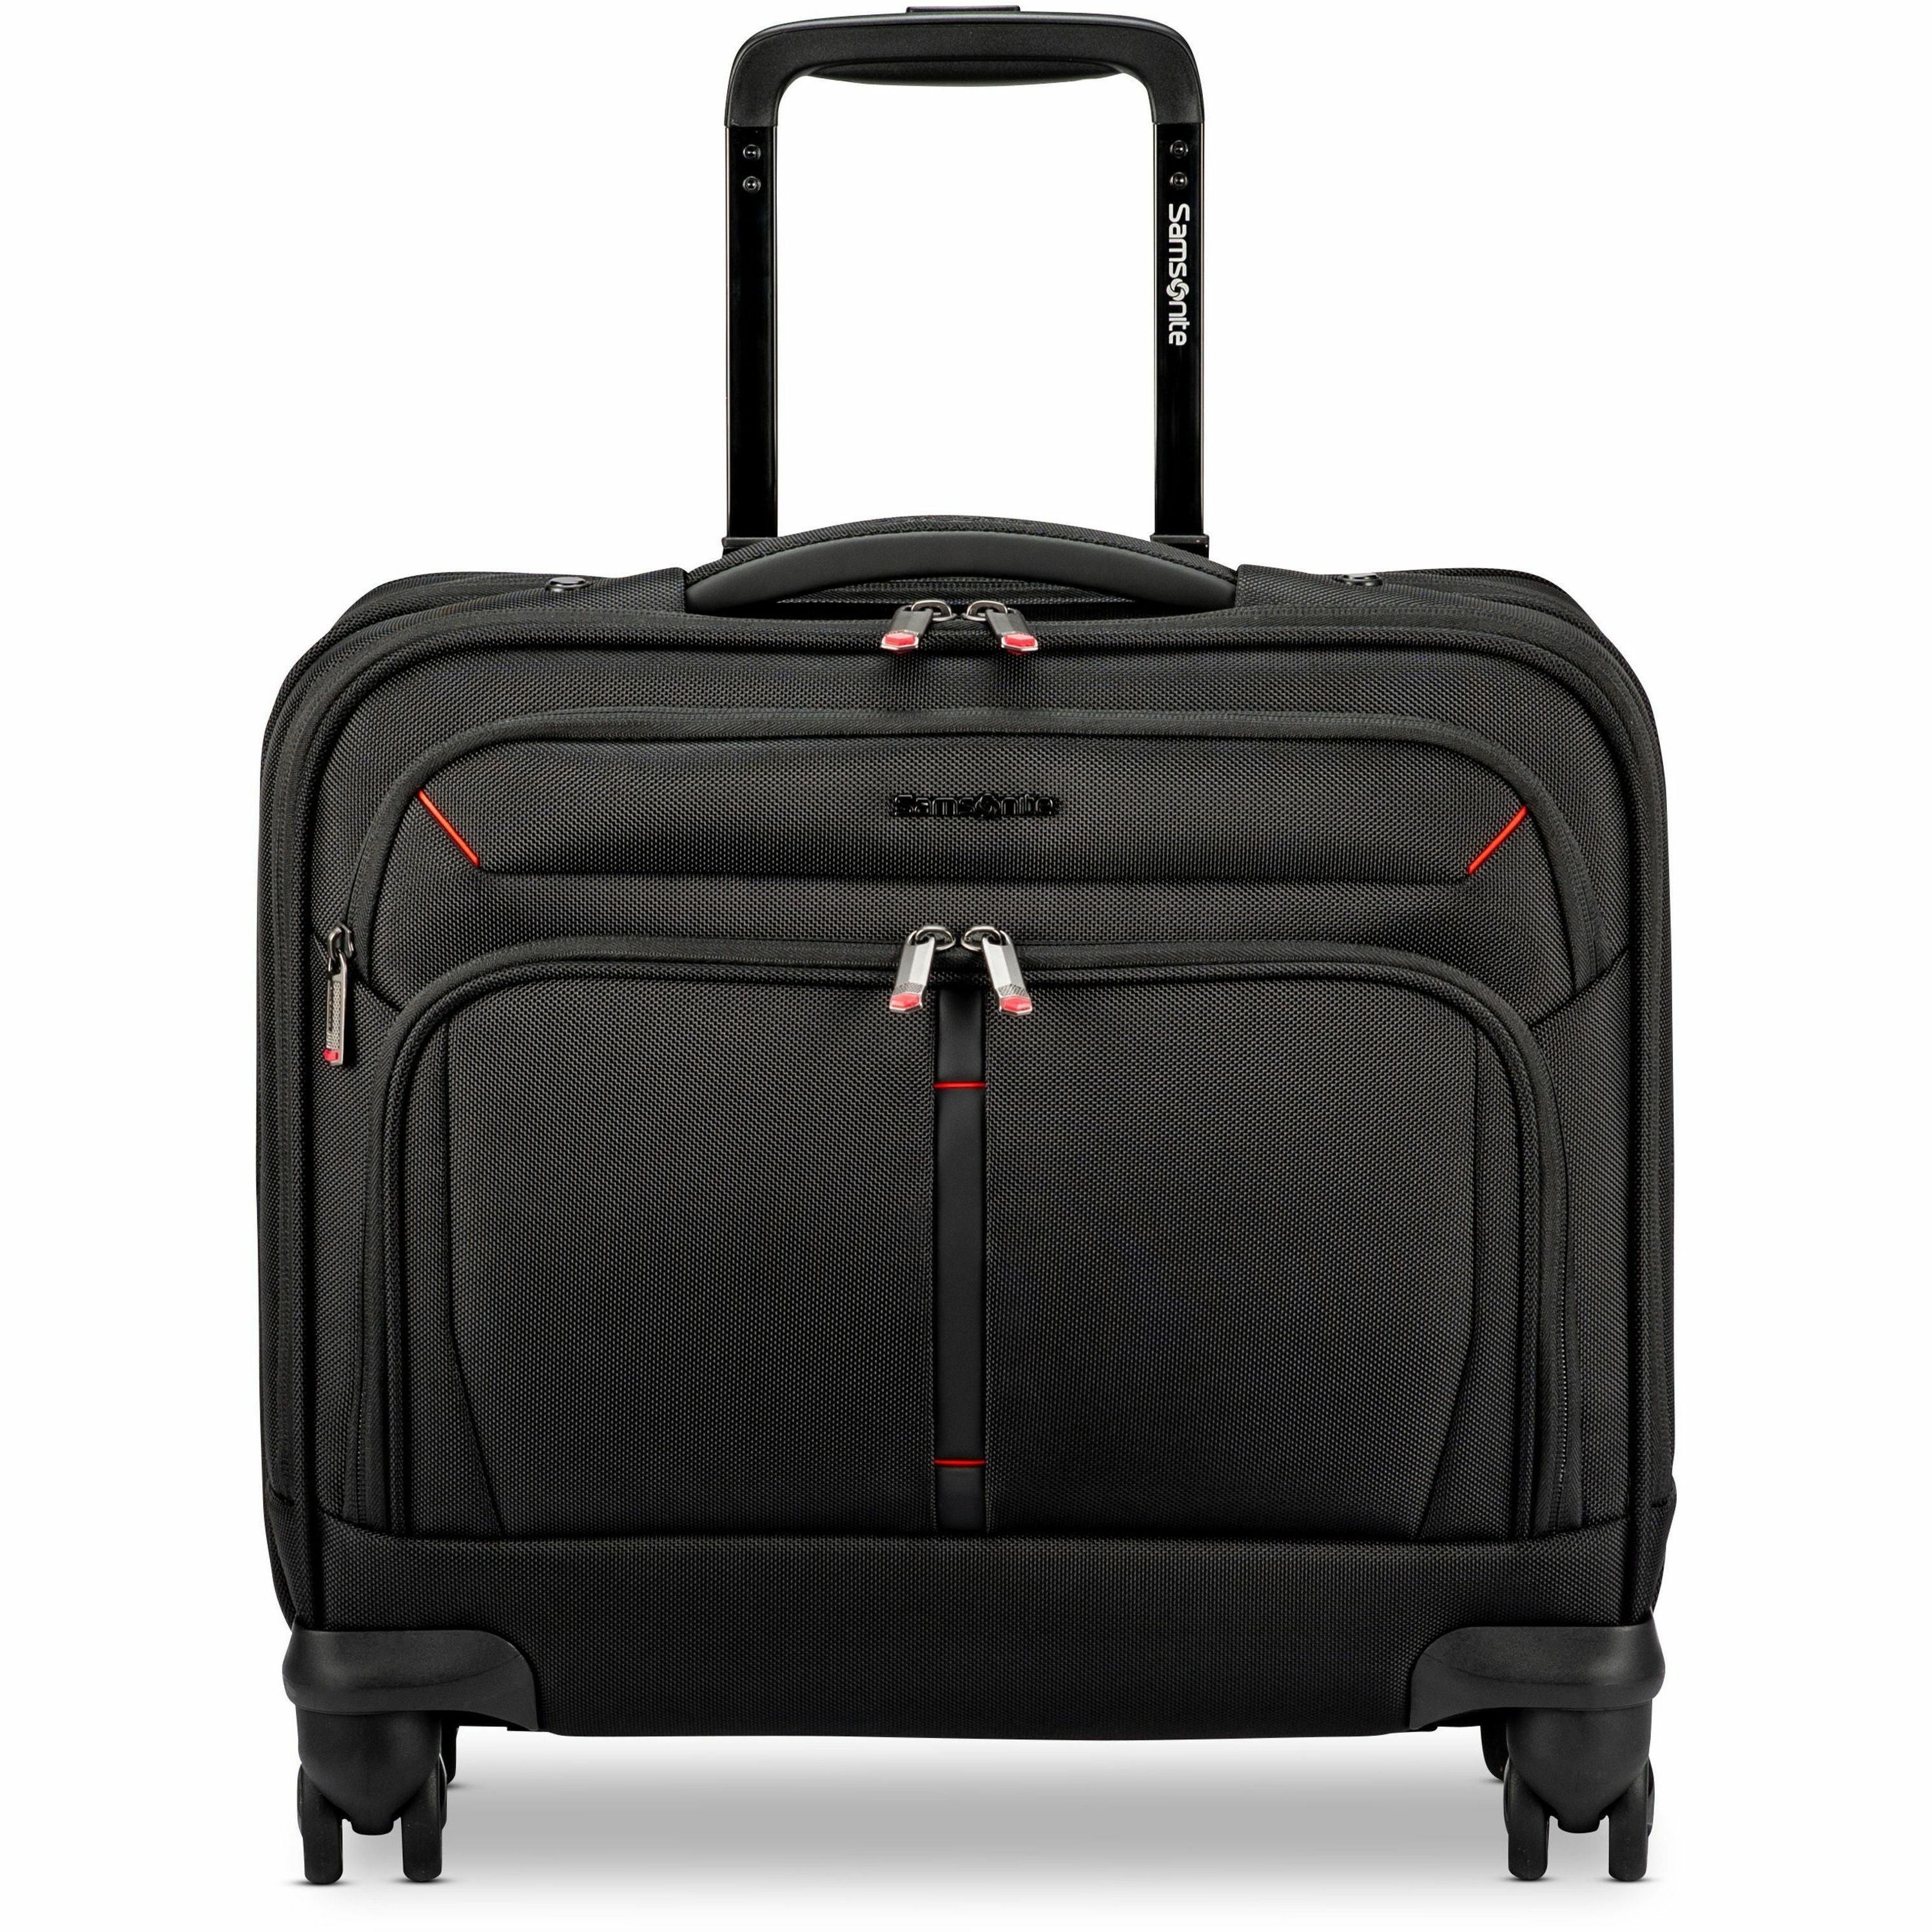 samsonite-xenon-30-travel-luggage-case-for-129-to-156-notebook-tablet-accessories-black-1680d-ballistic-polyester-body-tricot-interior-material-trolley-strap-handle-1-each_sml1473331041 - 3